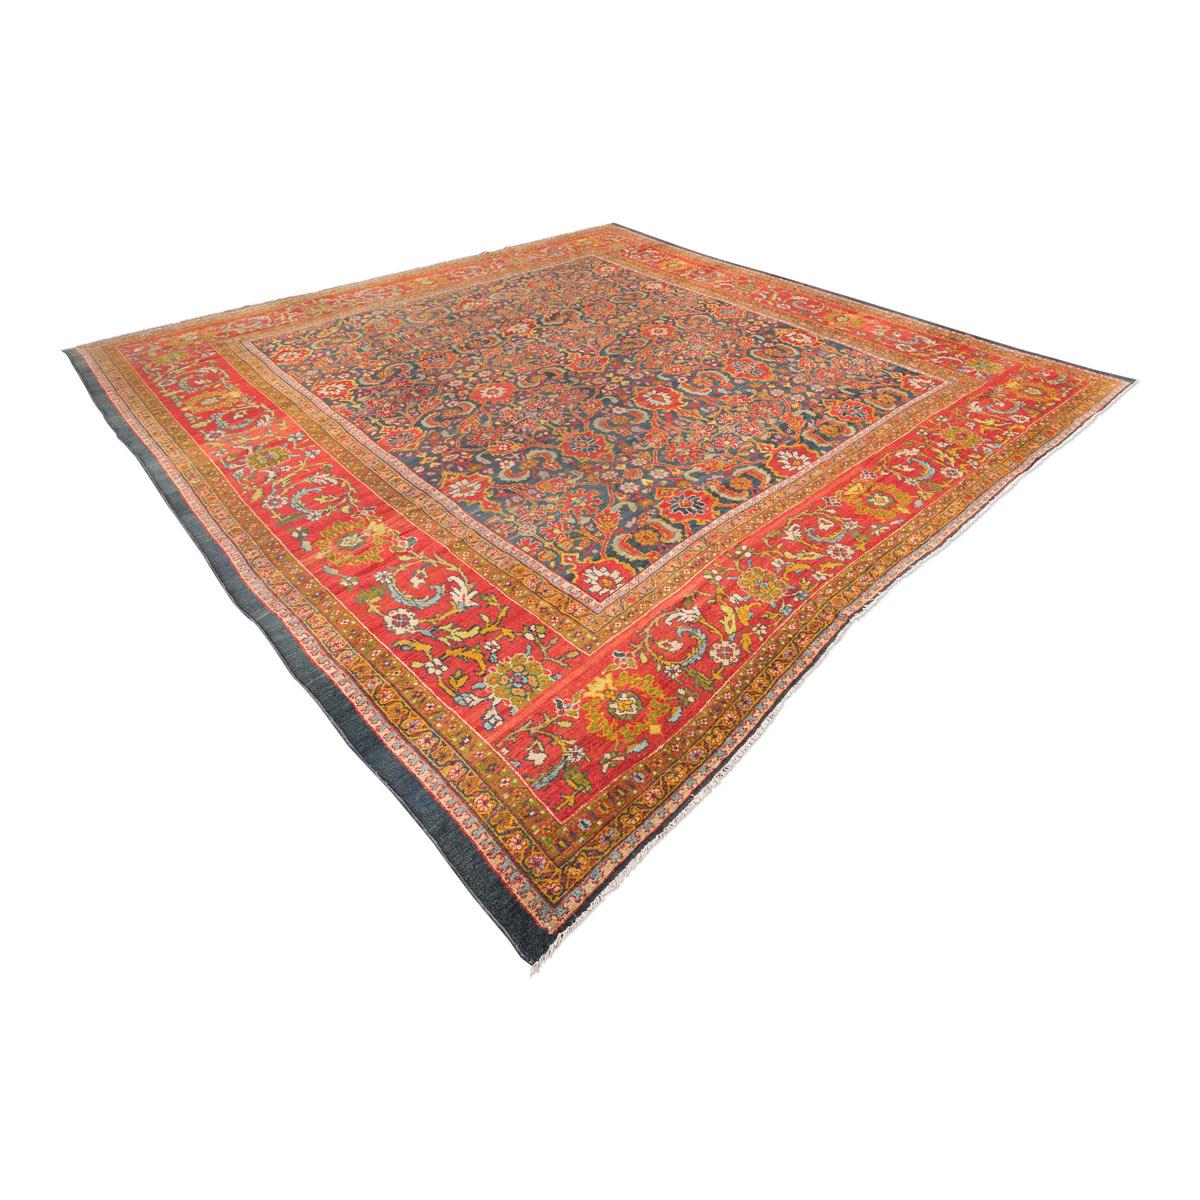 Ziegler Sultanabad rug made by the Swiss Ziegler, Co. for the European market of the time.
- Measures: 3.60 x 3.50 m.
- In this piece have been taken care of to the maximum the use of natural dyes, green, blue turquoise in the designs on a blue